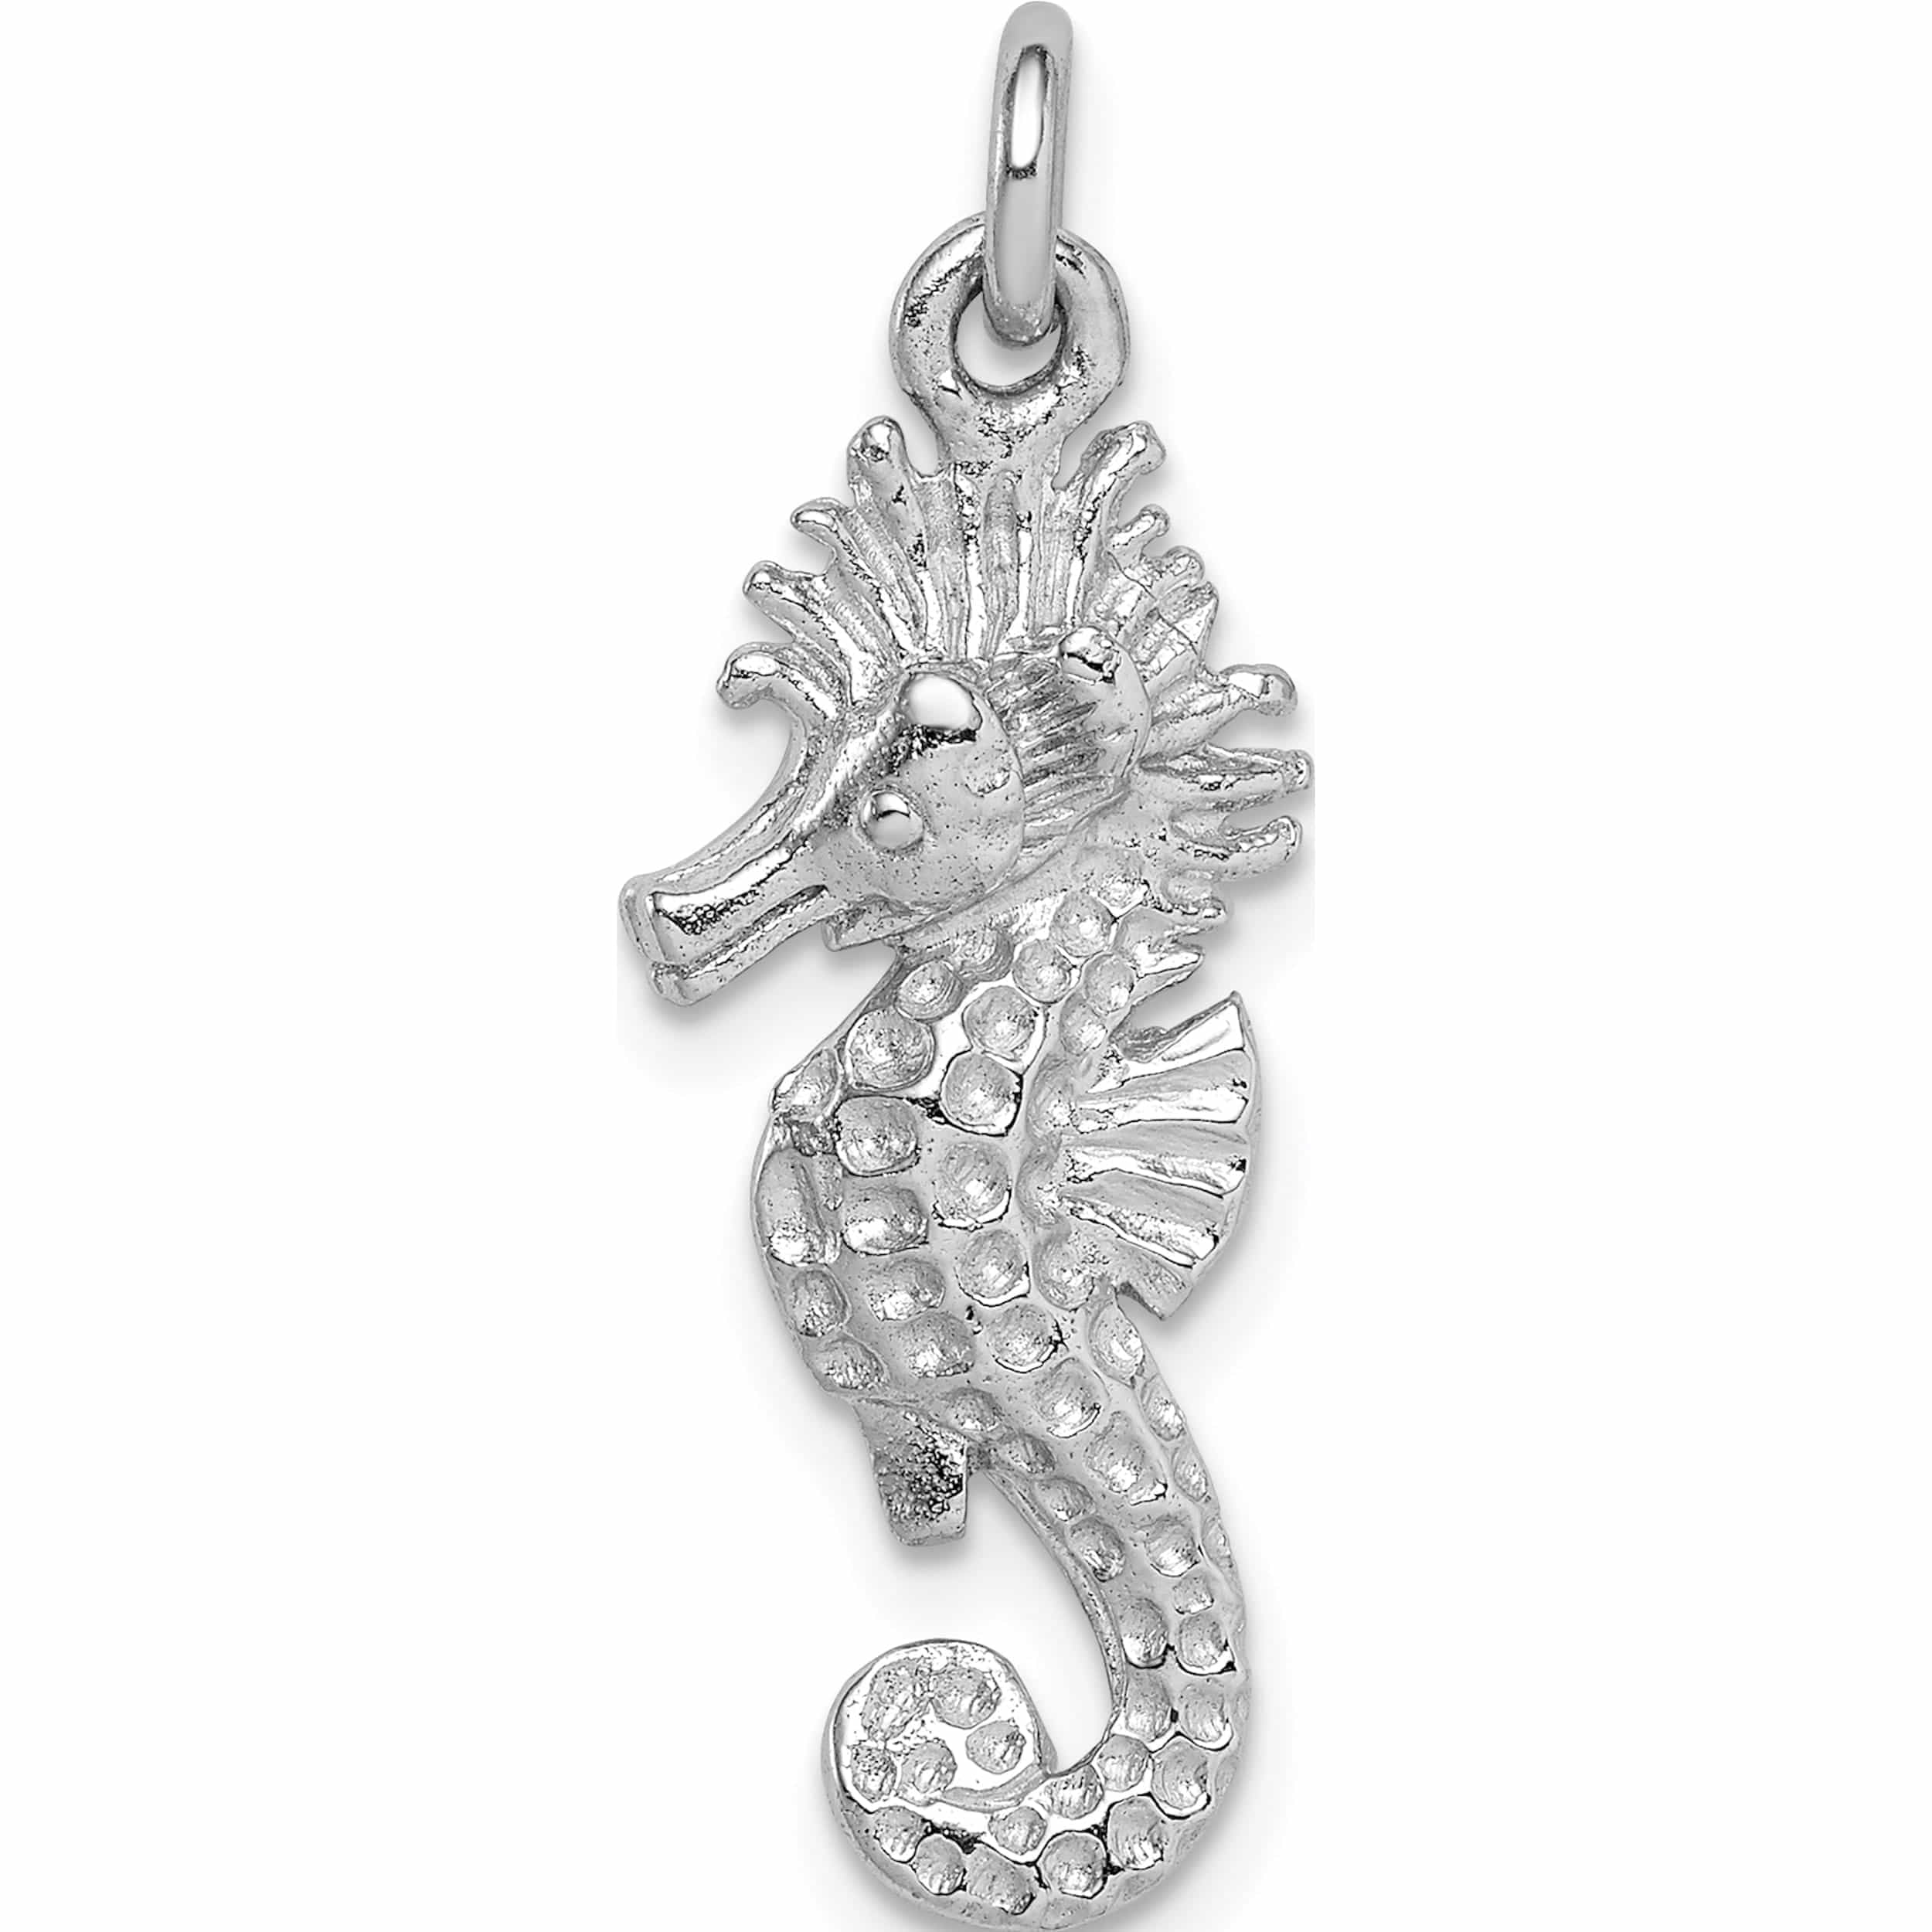 925 Sterling Silver Seahorse Charm per 1 piece Detailed Sea Horse Charm 27mm 